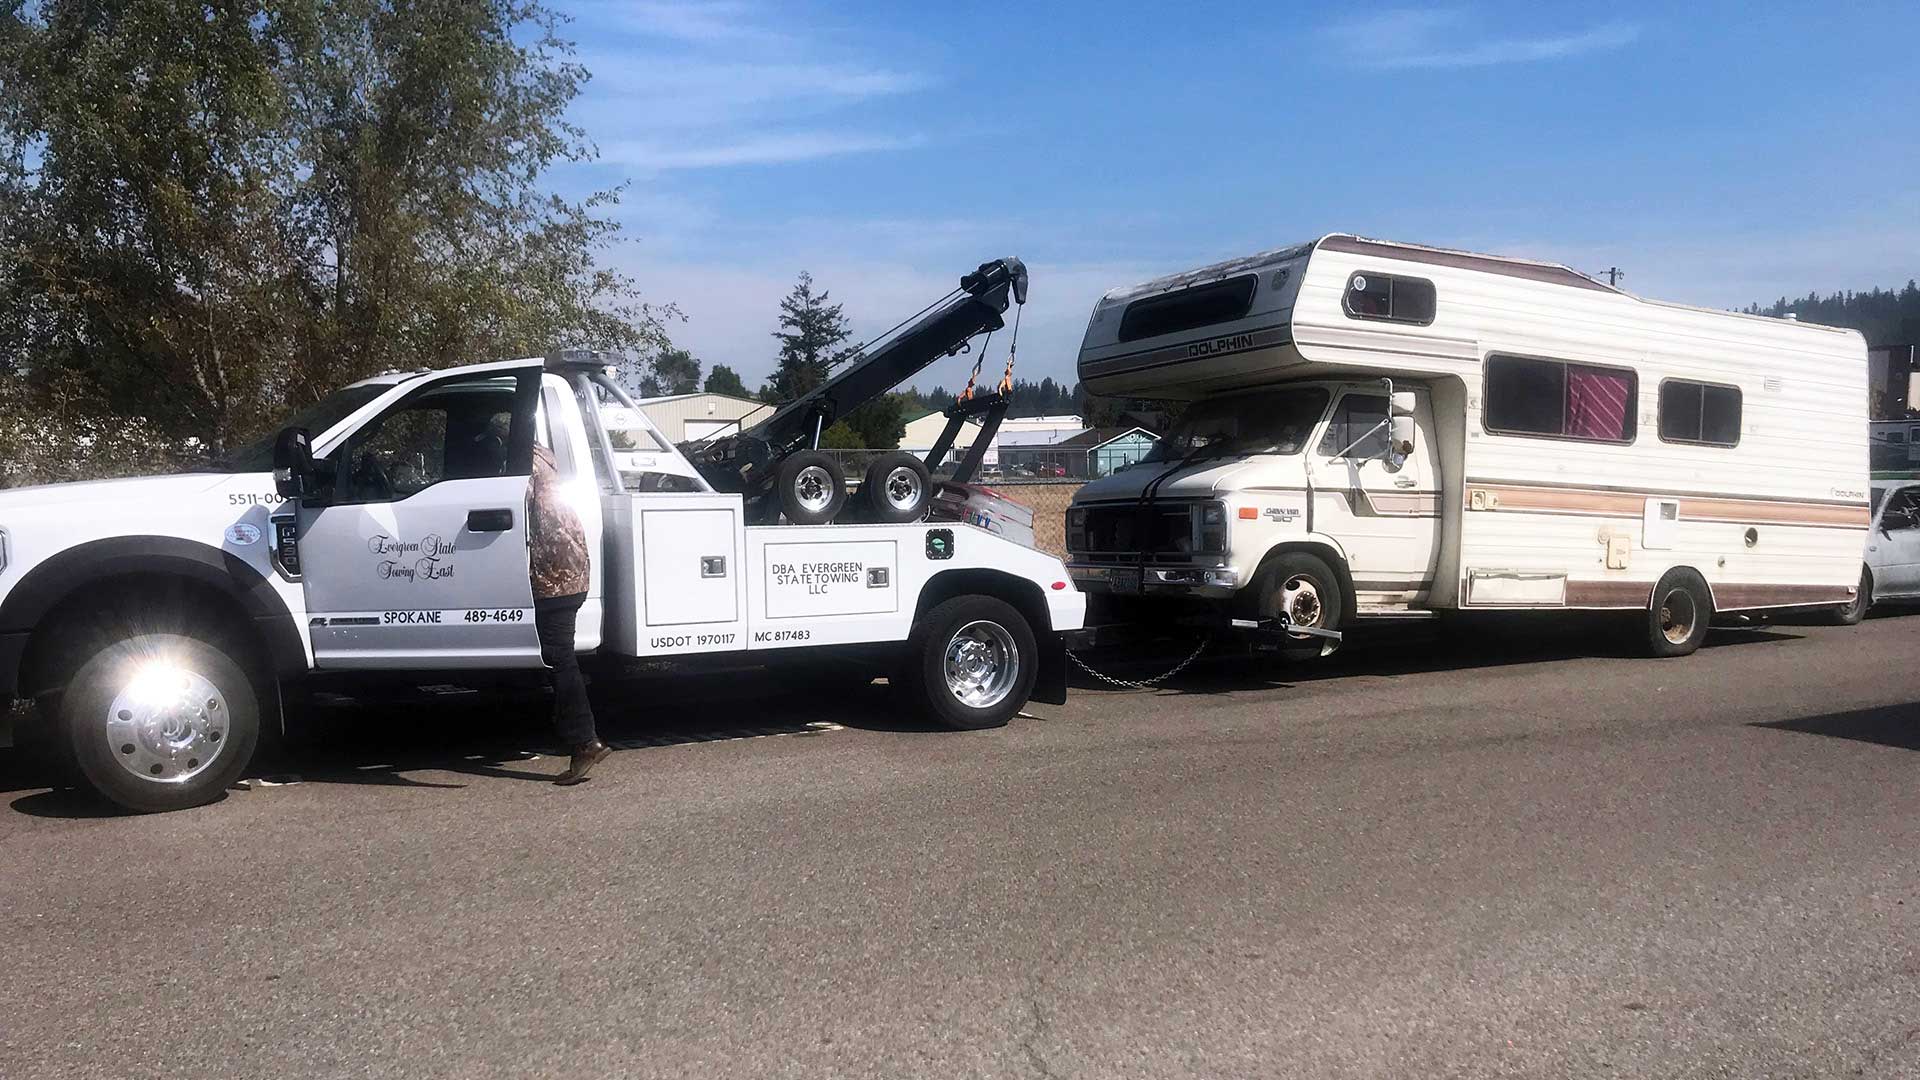 SPOKANE TOWING SERVICES - Cheap Tow Truck Company in WA